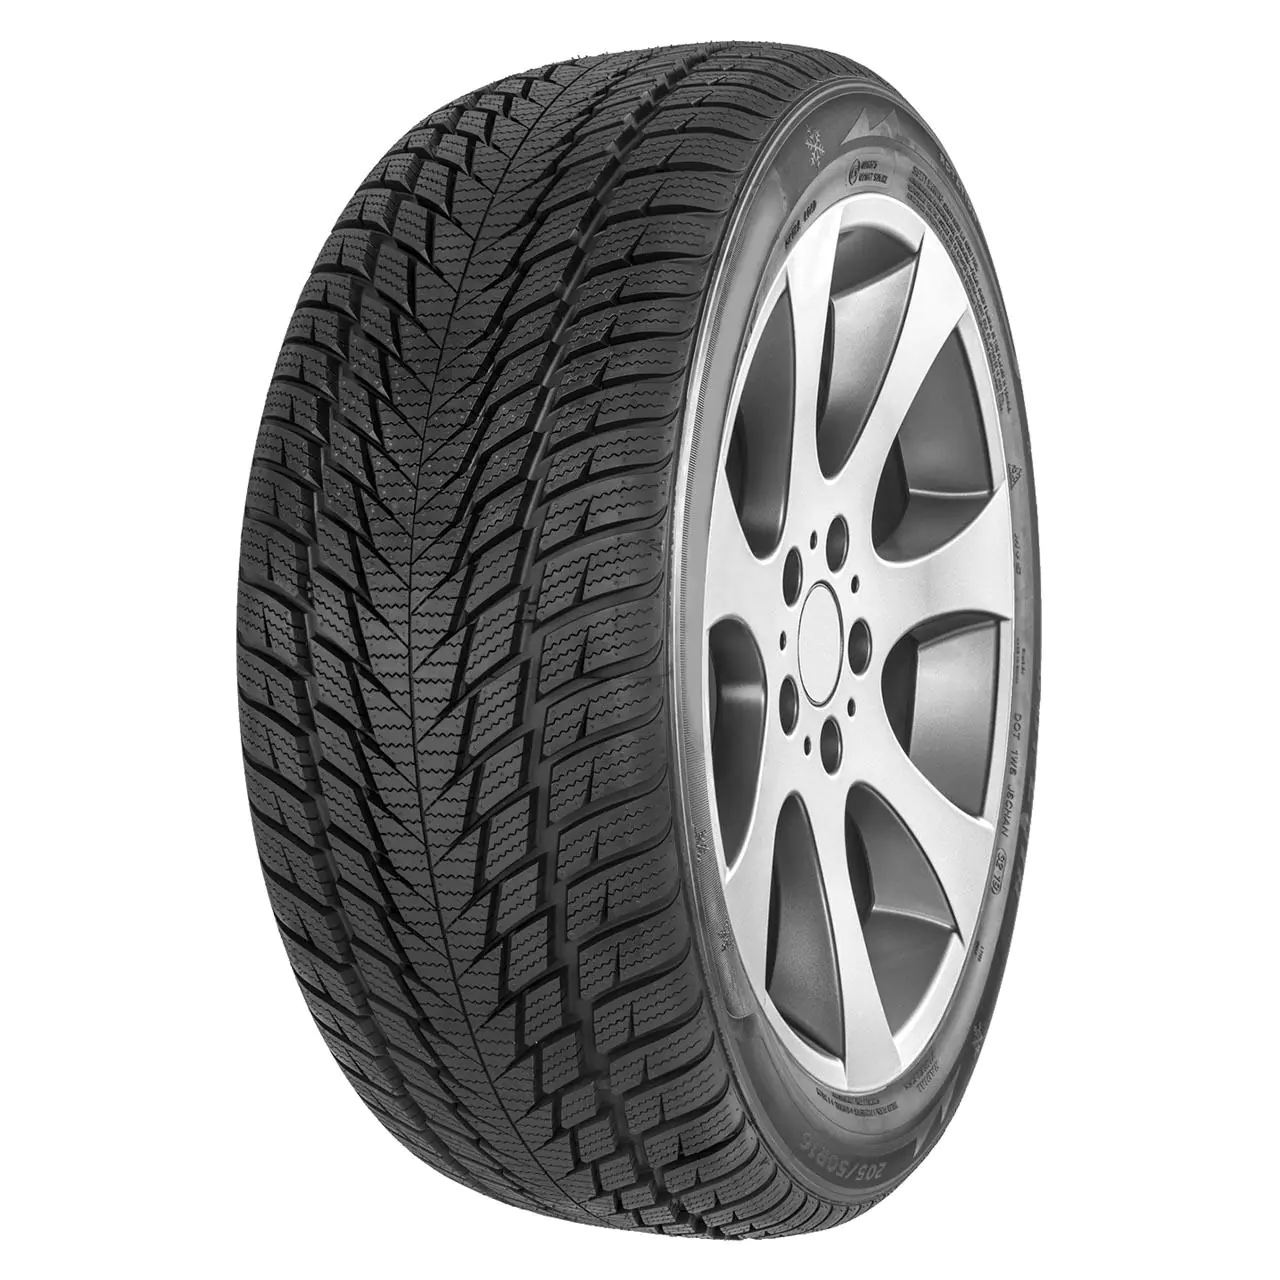 Gomme Autovettura Fortuna 235/45 R19 99V GOWIN UHP3 XL M+S Invernale